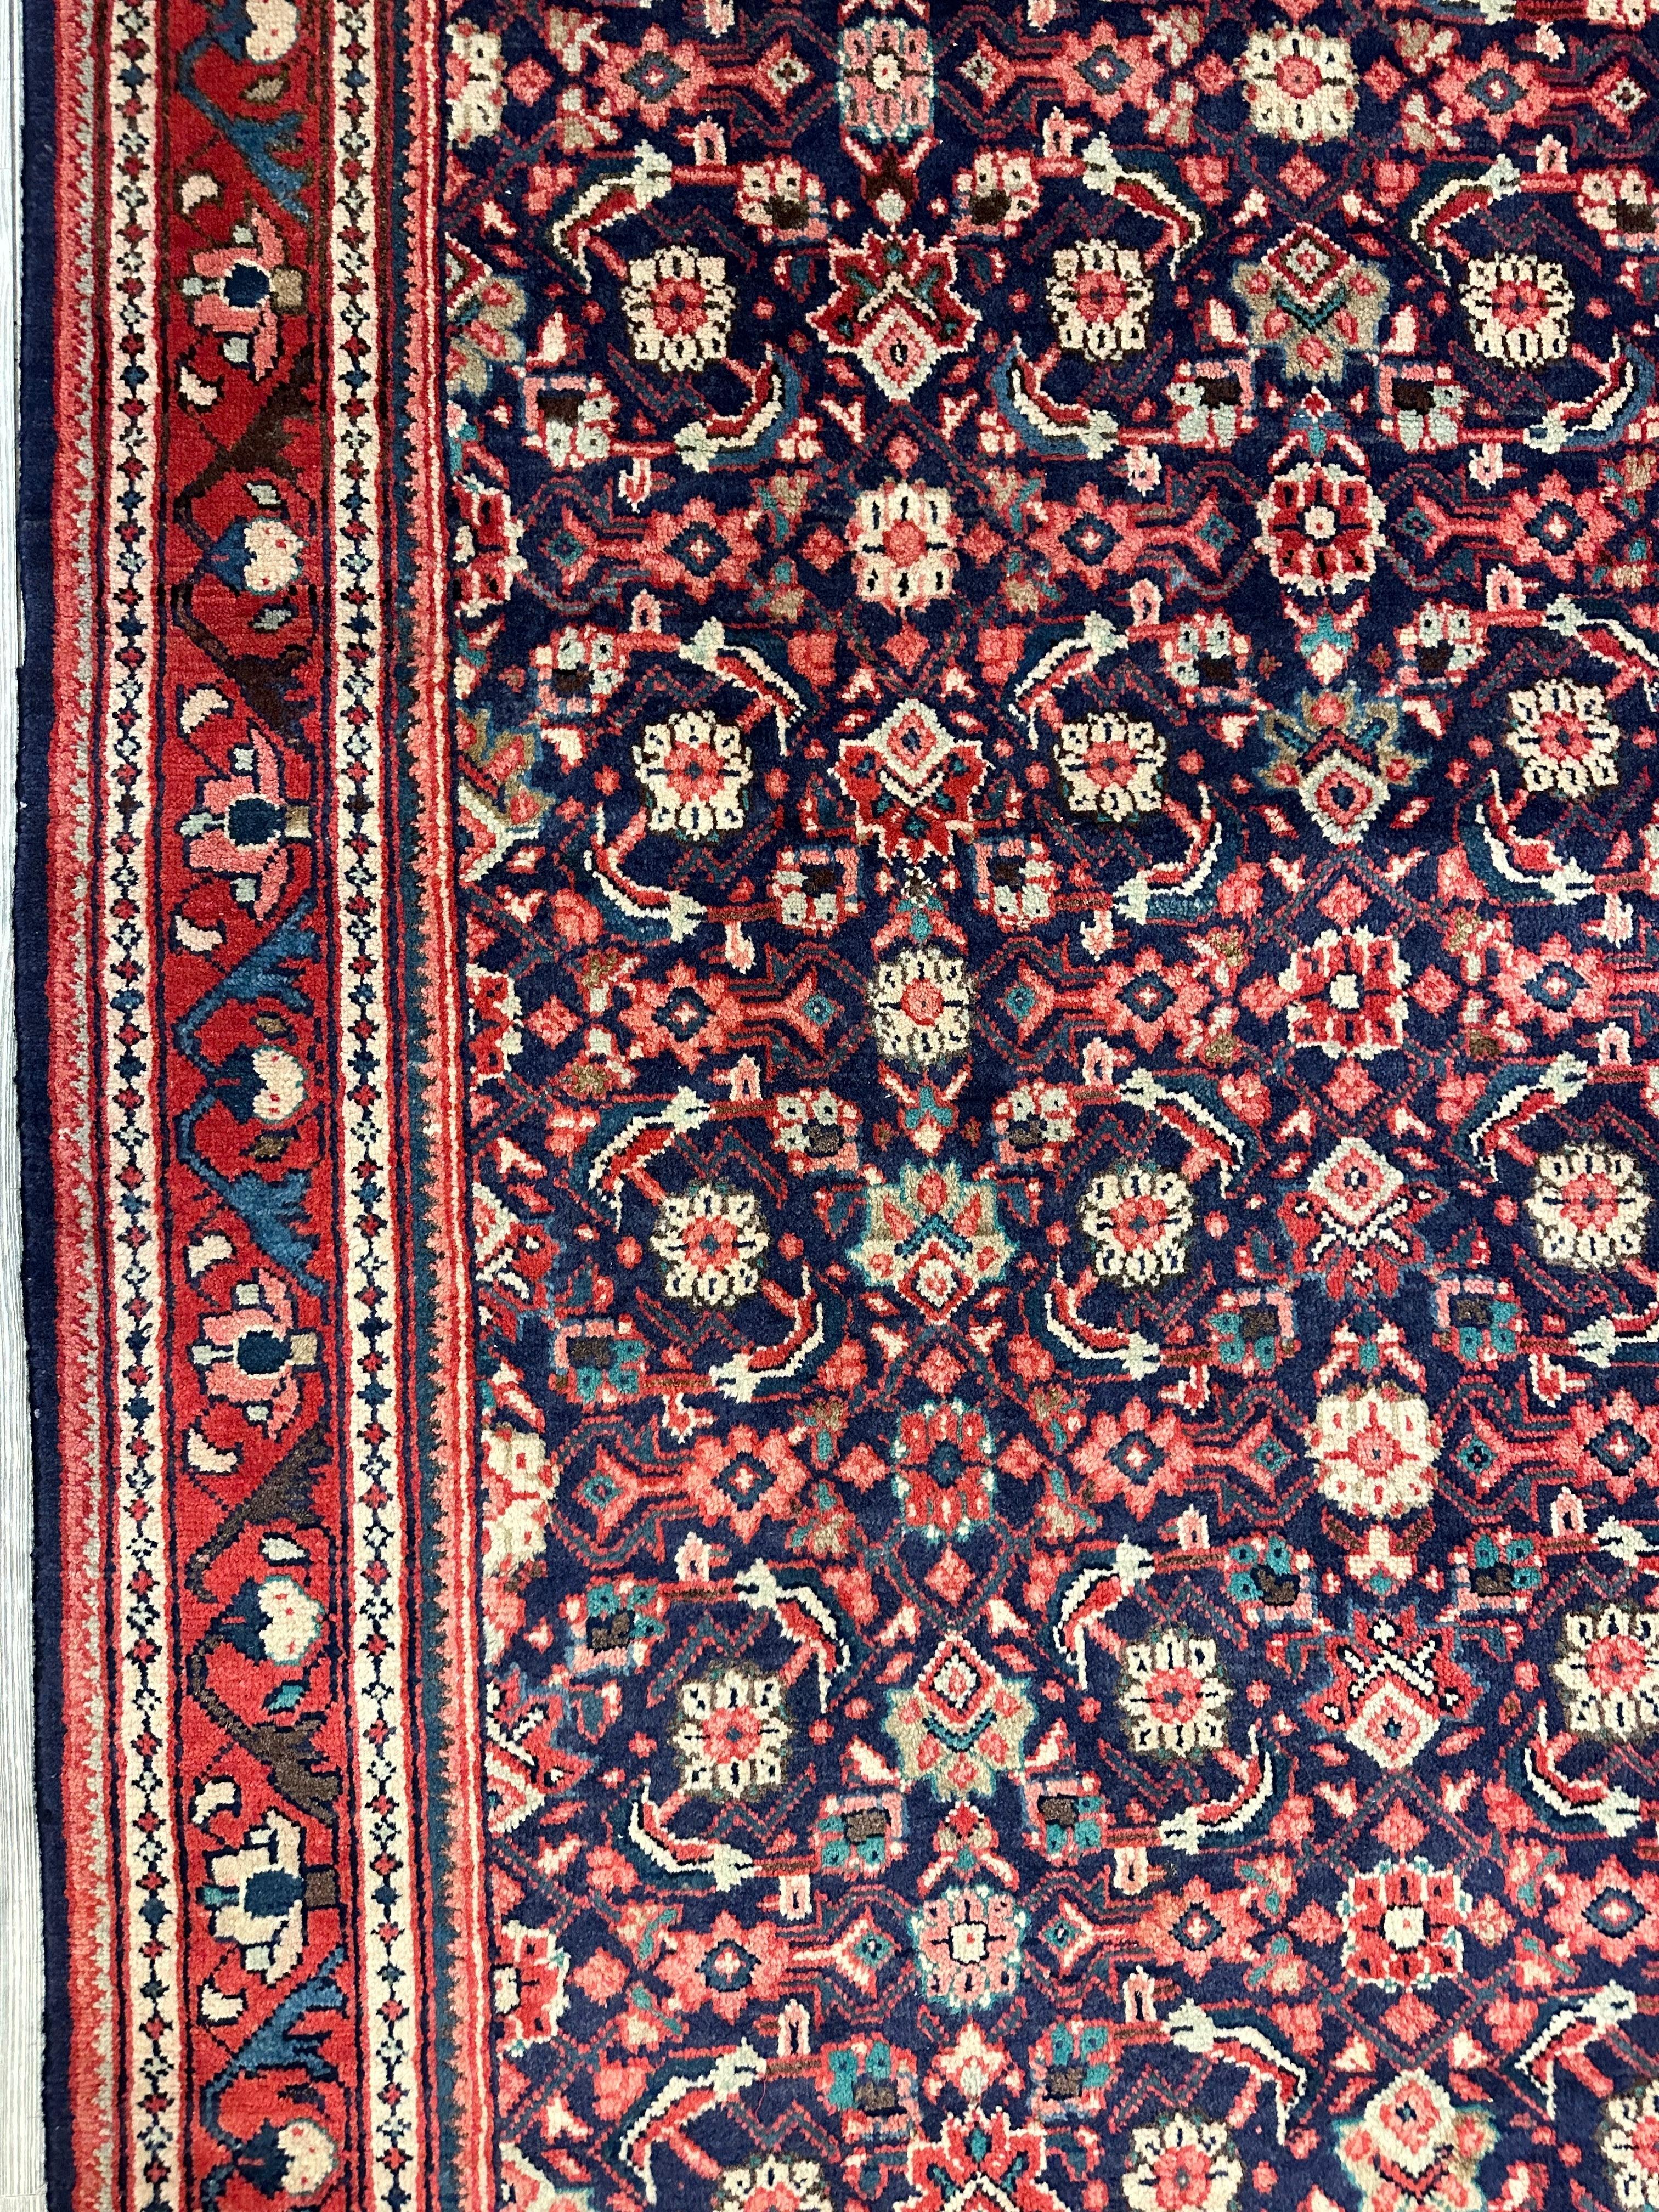 Fine Hand-Knotted Persian Arak Area Rug 5’6” x 10’3”